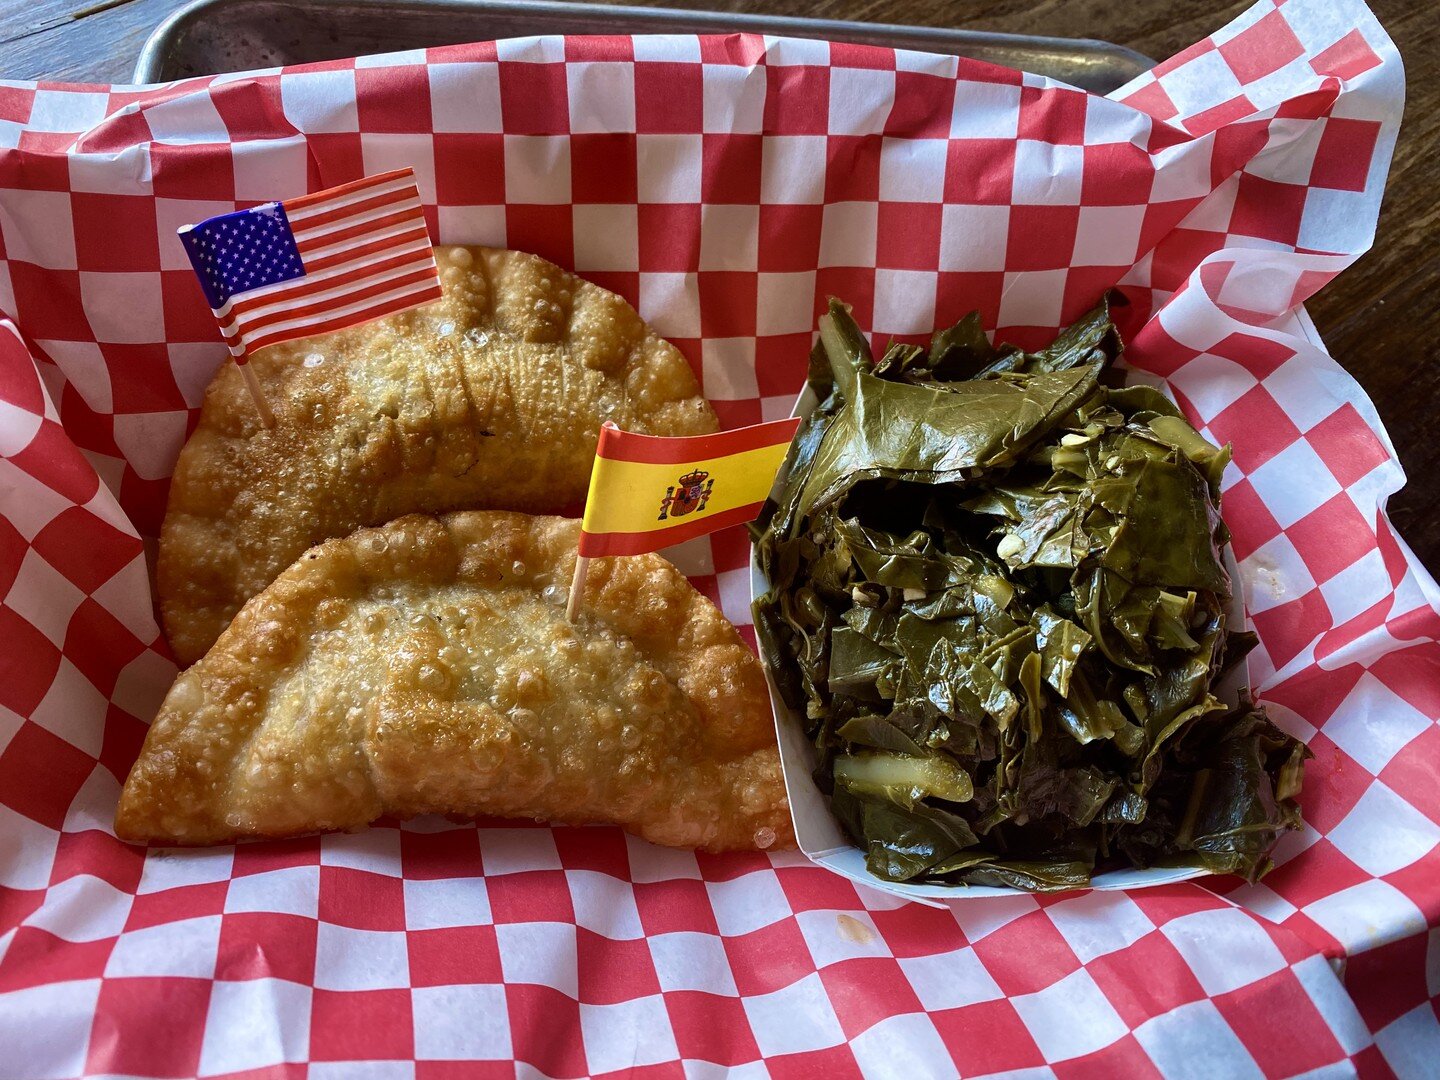 some #pulledpork #empanadas and #collardgreens at #boricuasoul in #durham and a #redstripe #beer to wash it all down #food #placesiveeaten #southern #caribbean